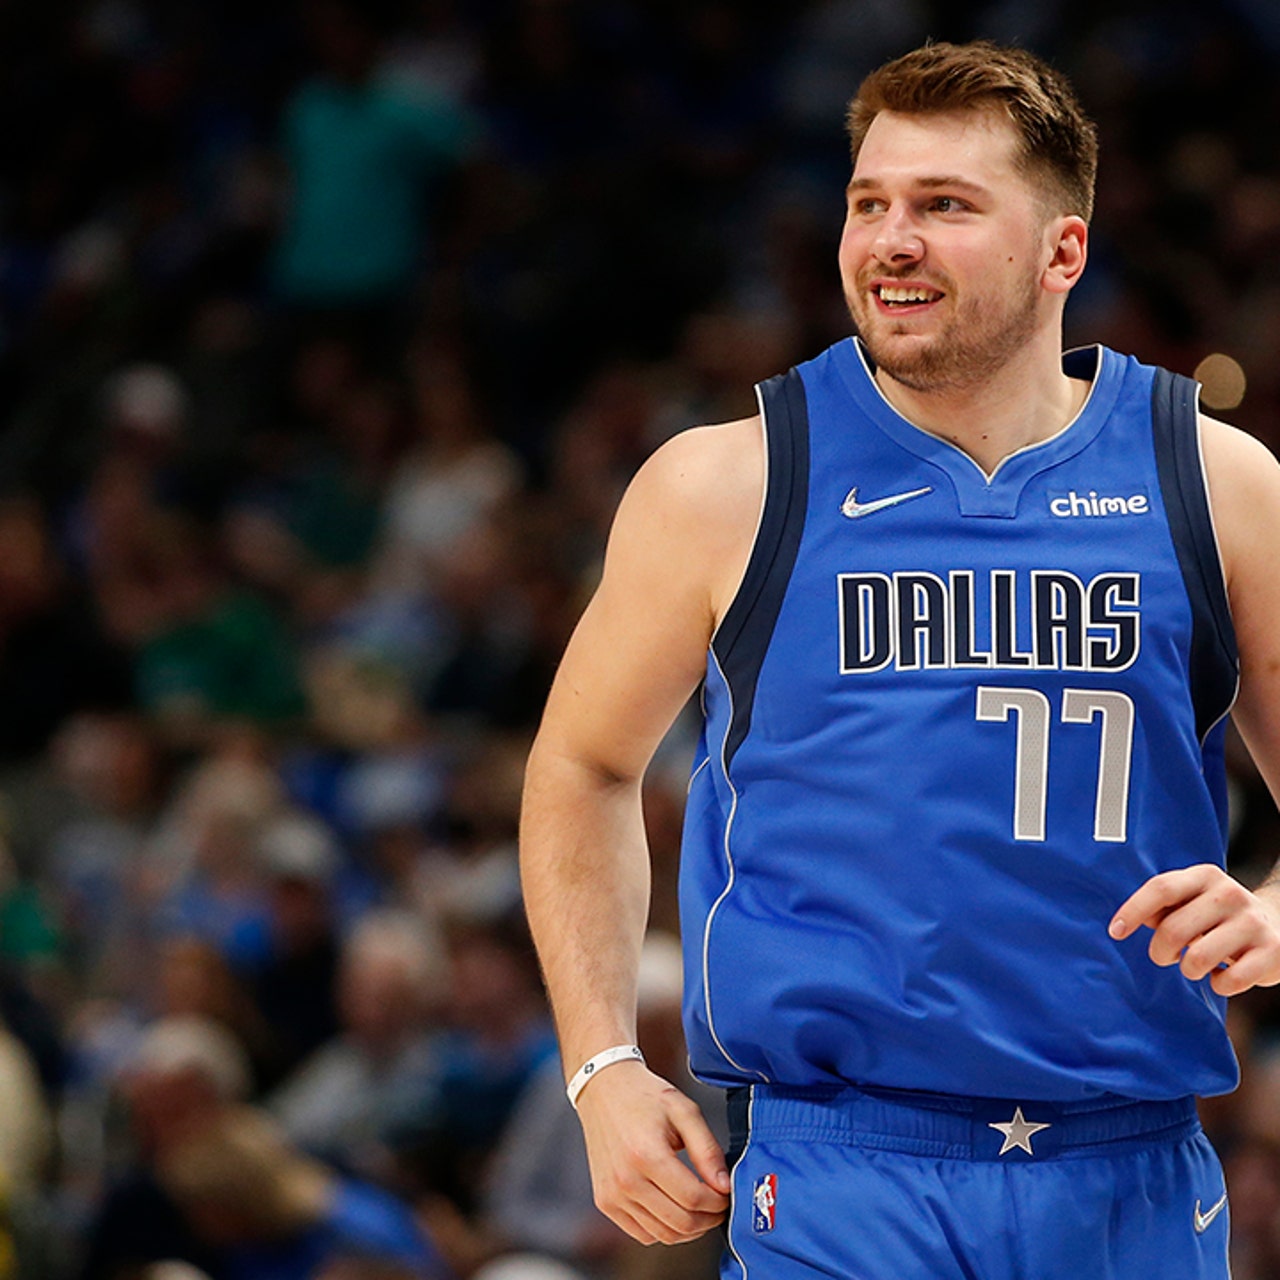 Top 20 NBA players under 25: Luka Doncic, Ja Morant, Anthony